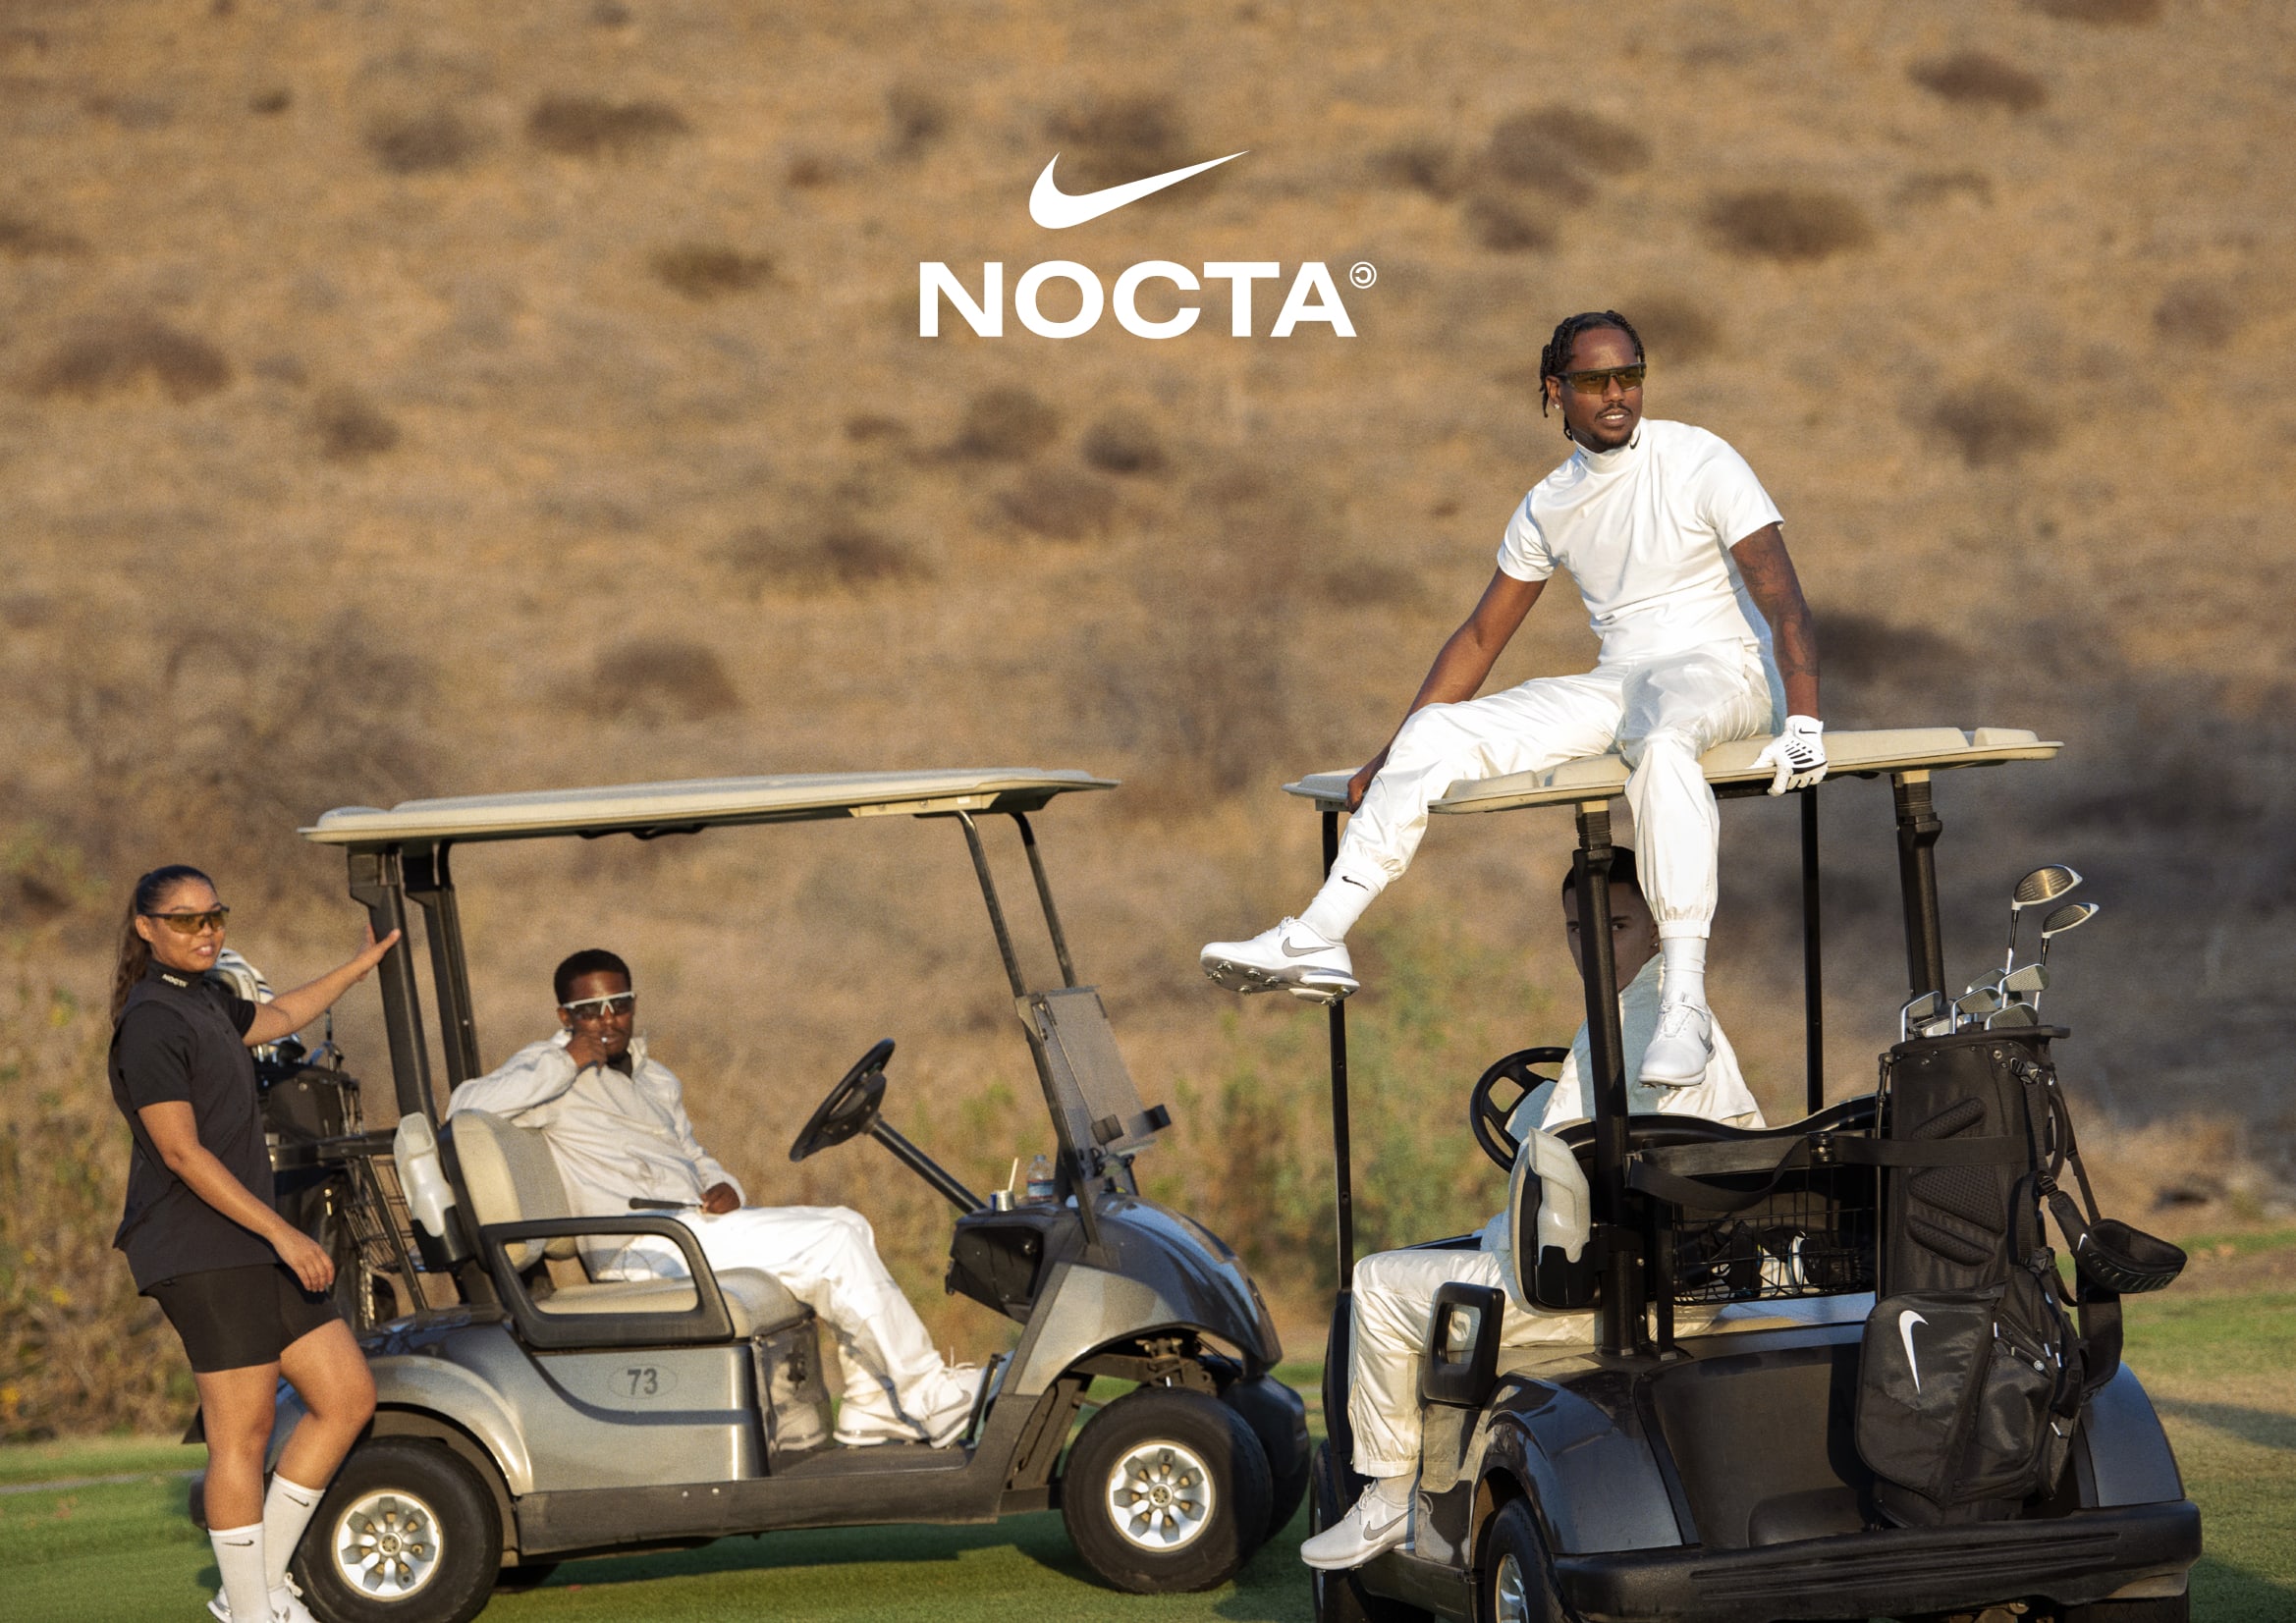 Changing face of fashion: Drake and Nike announce a collaborative  sub-label, Nocta - Luxurylaunches